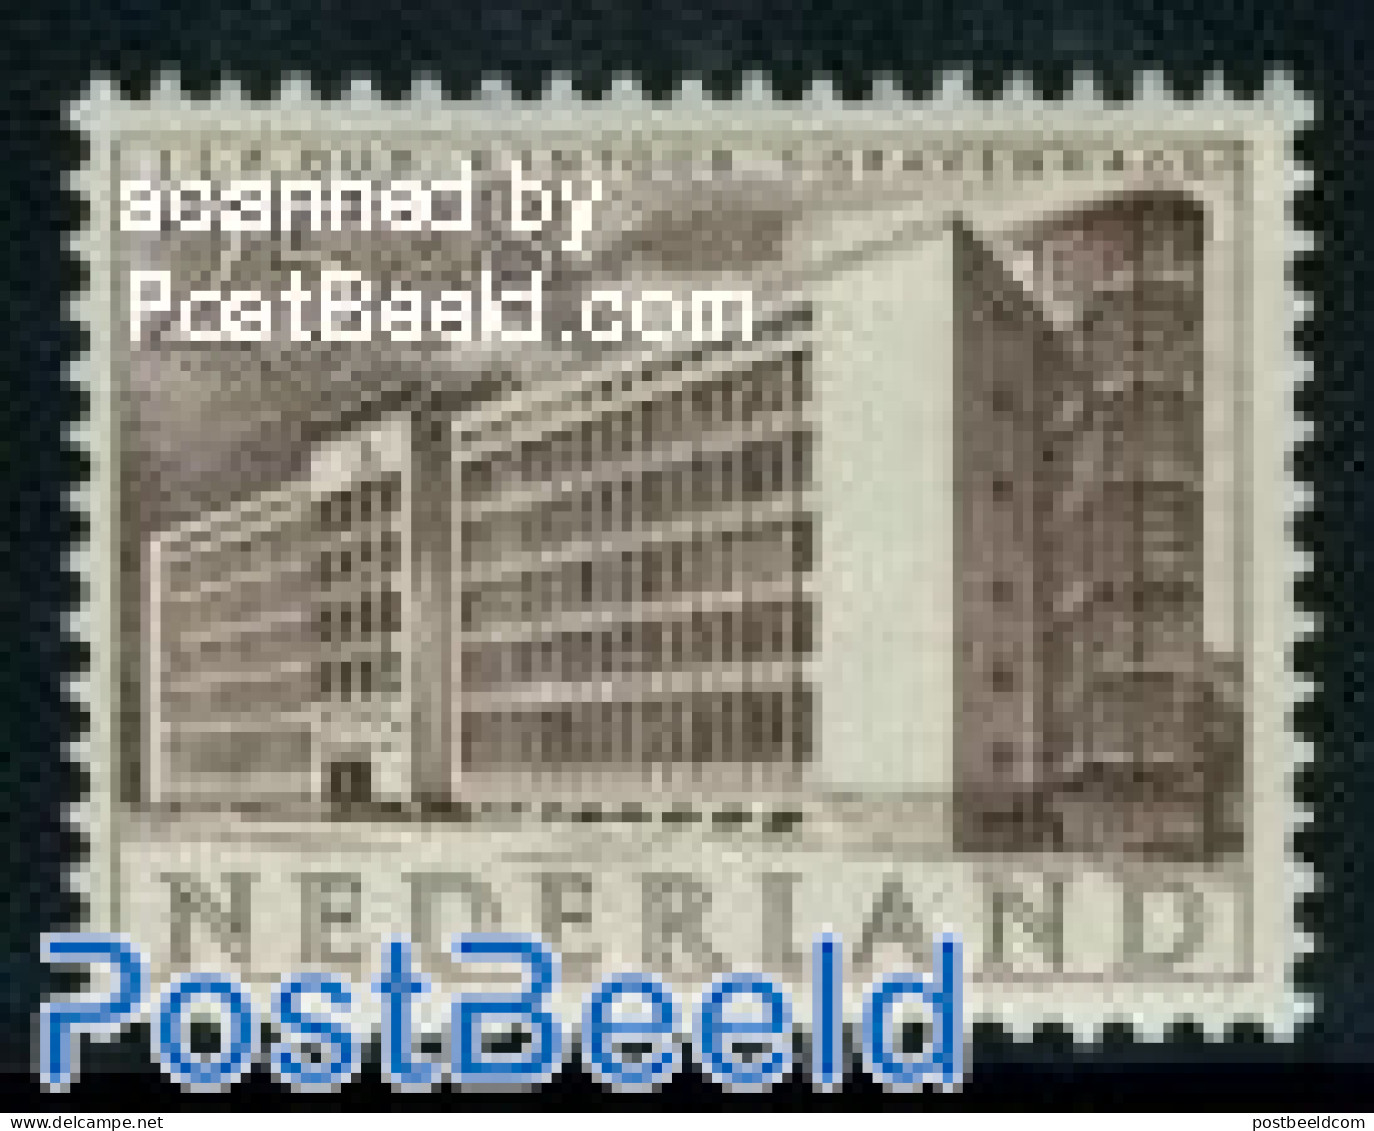 Netherlands 1955 25+8c, Den Haag, Stamp Out Of Set, Unused (hinged), Art - Modern Architecture - Neufs